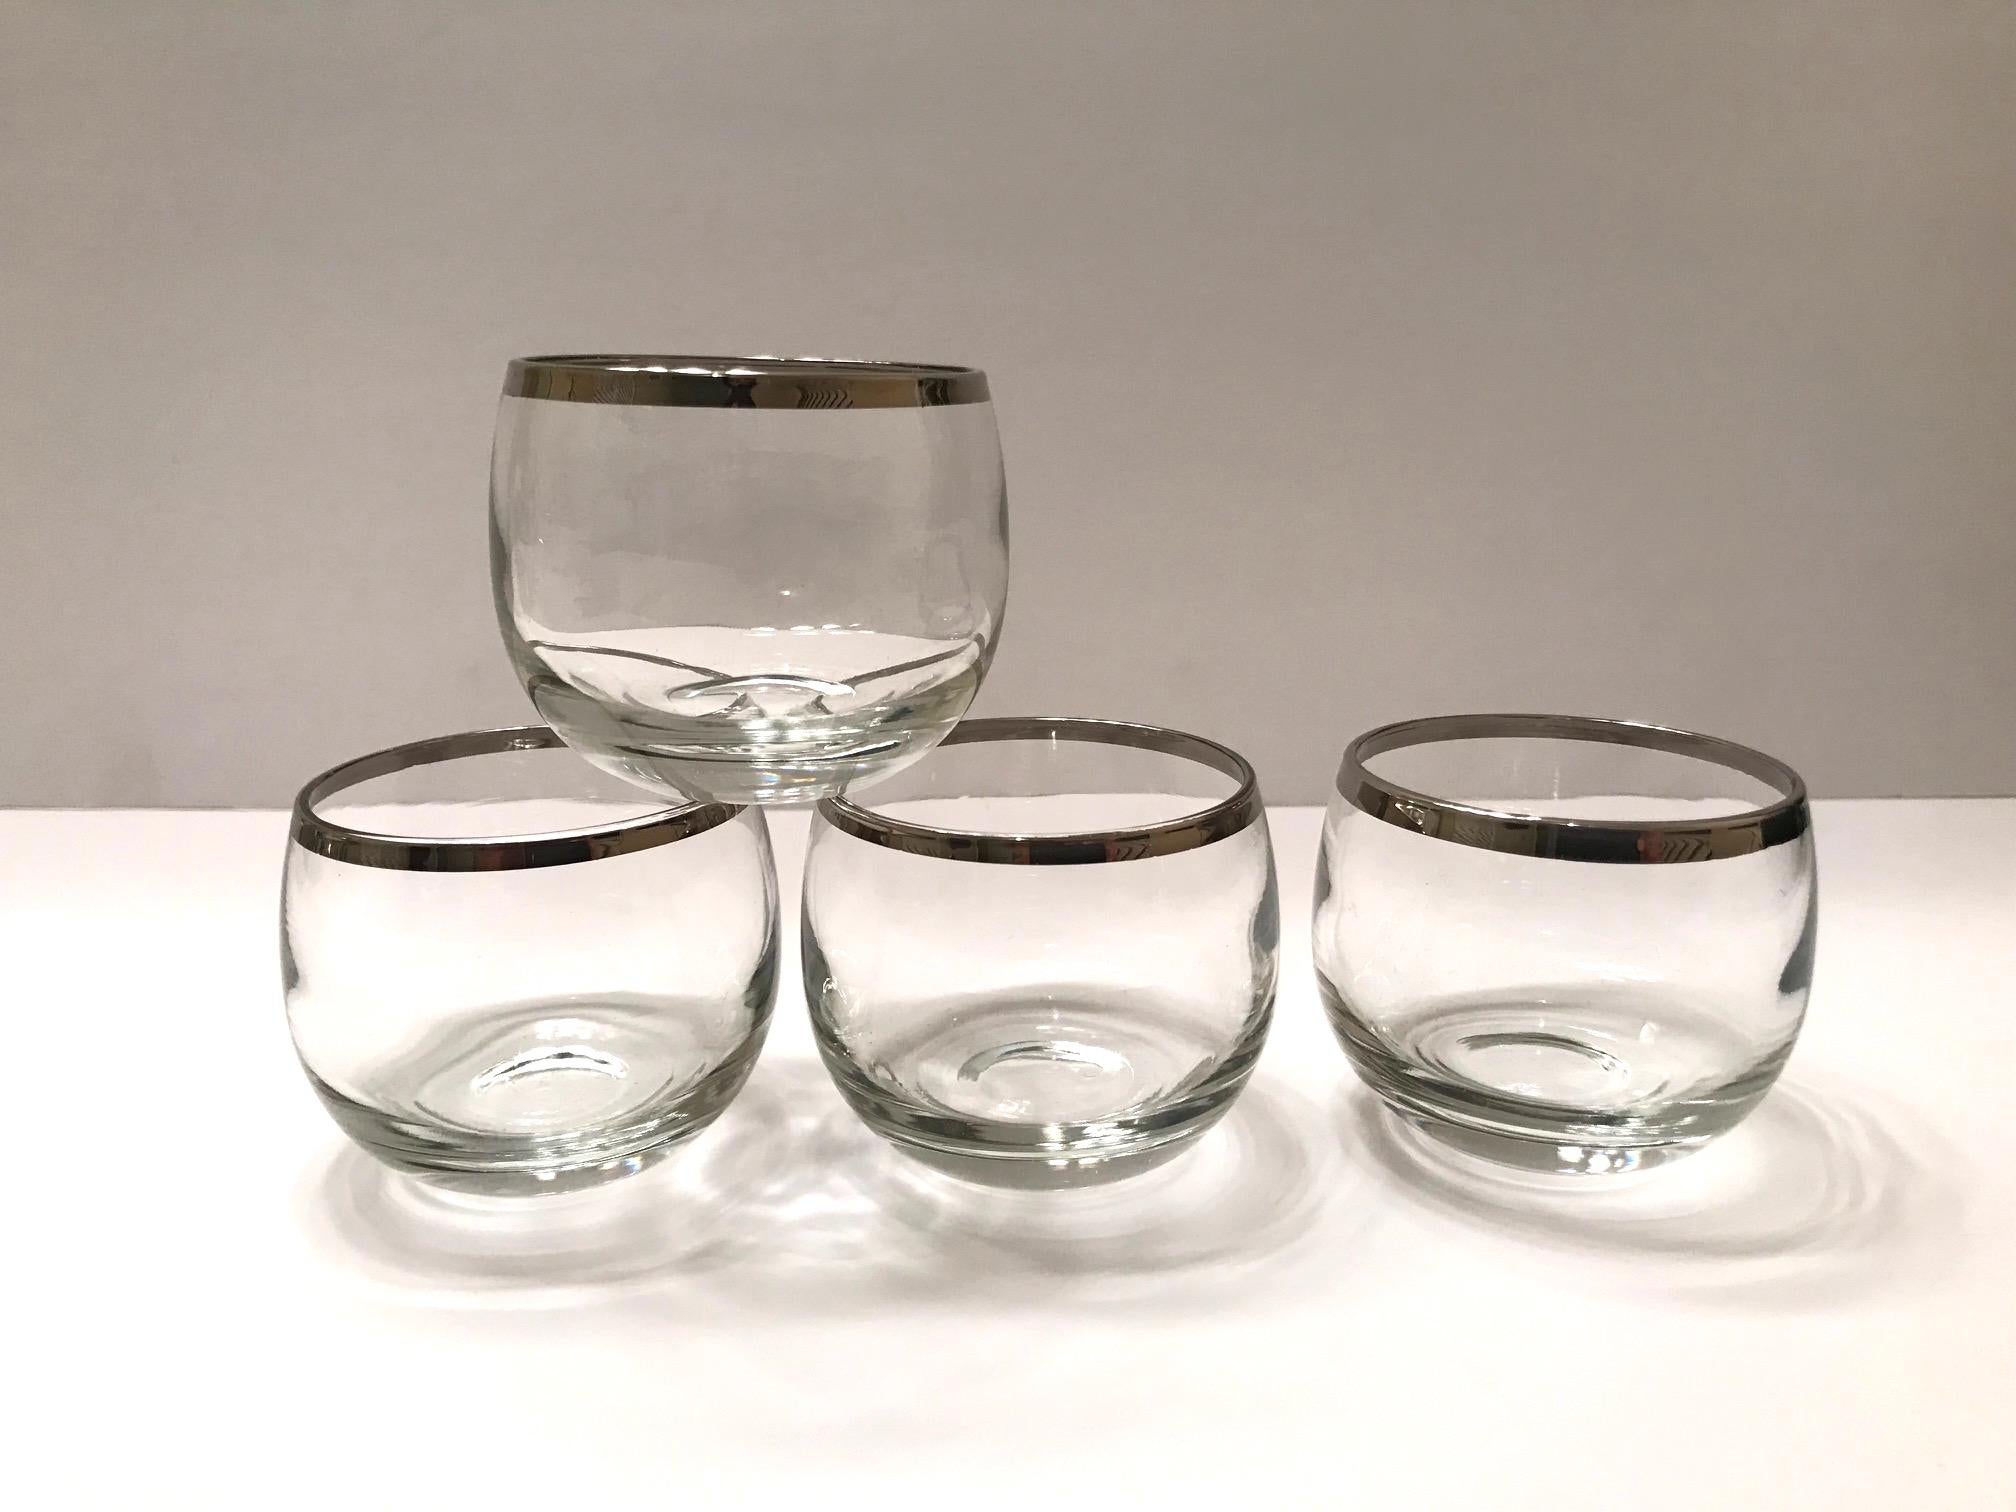 Mid-Century Modern Midcentury Barware Glass Set with Sterling Silver Overlay by Dorothy Thorpe